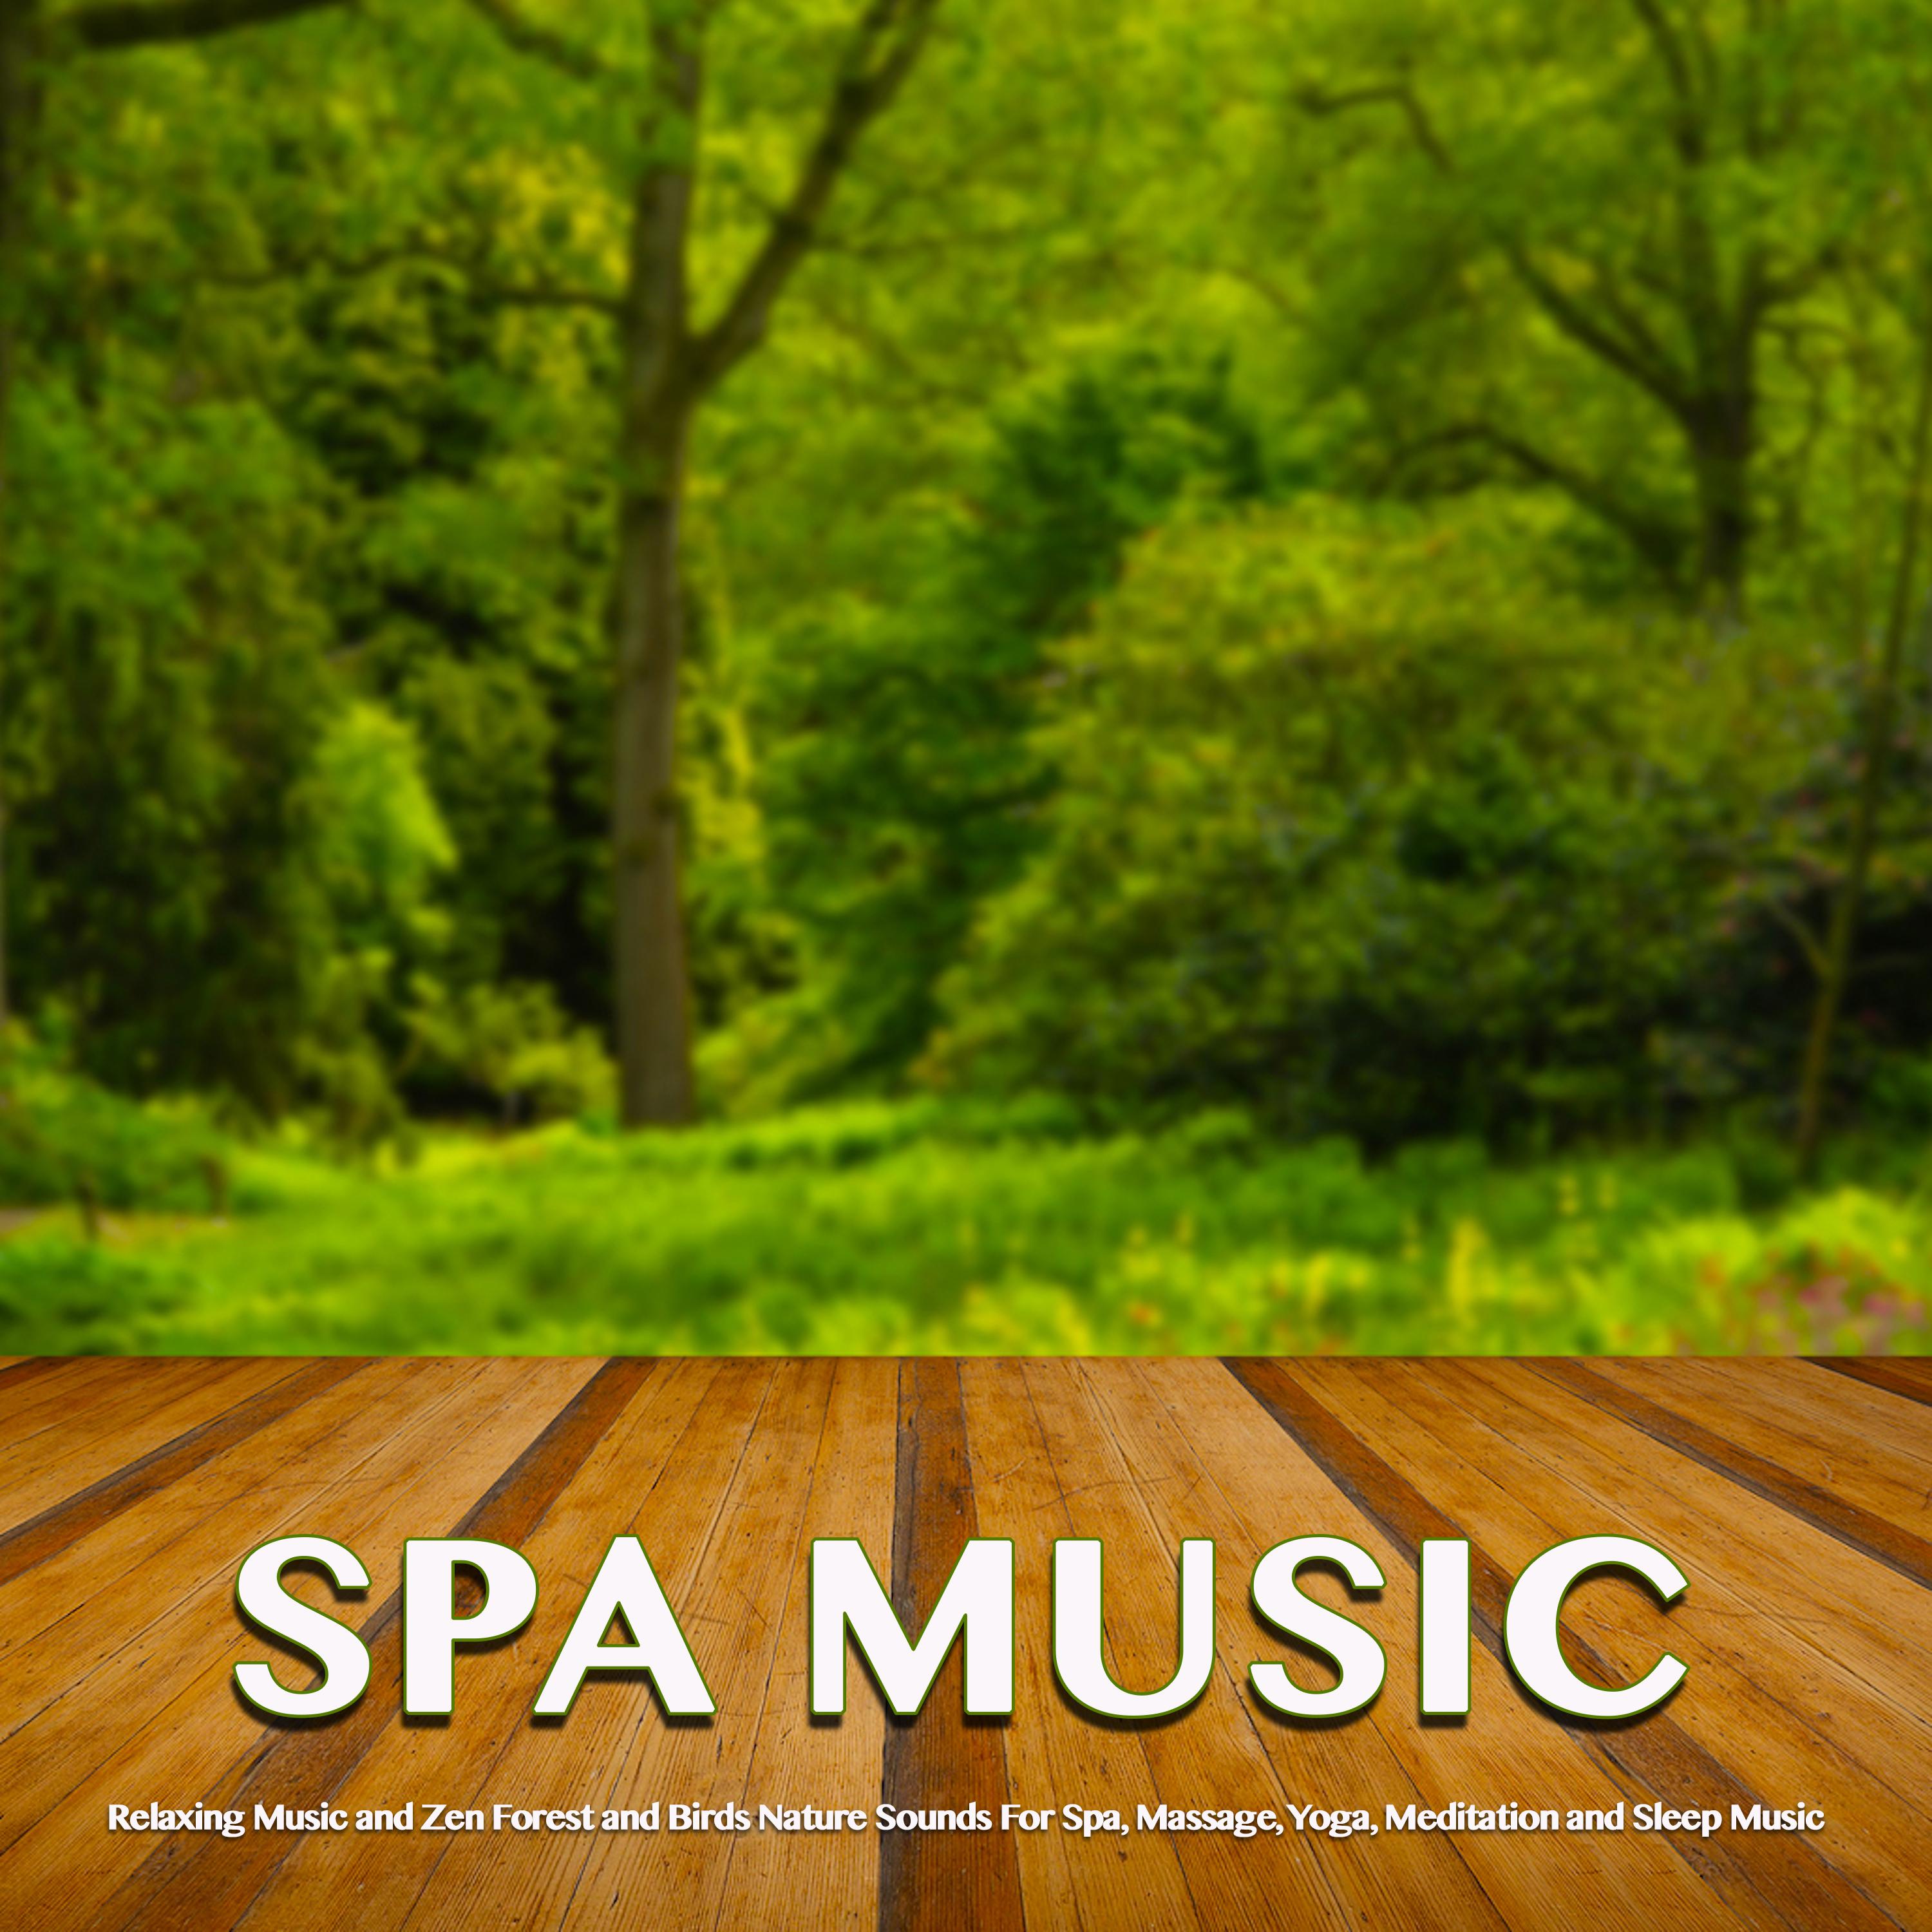 Forest Sounds for Spa